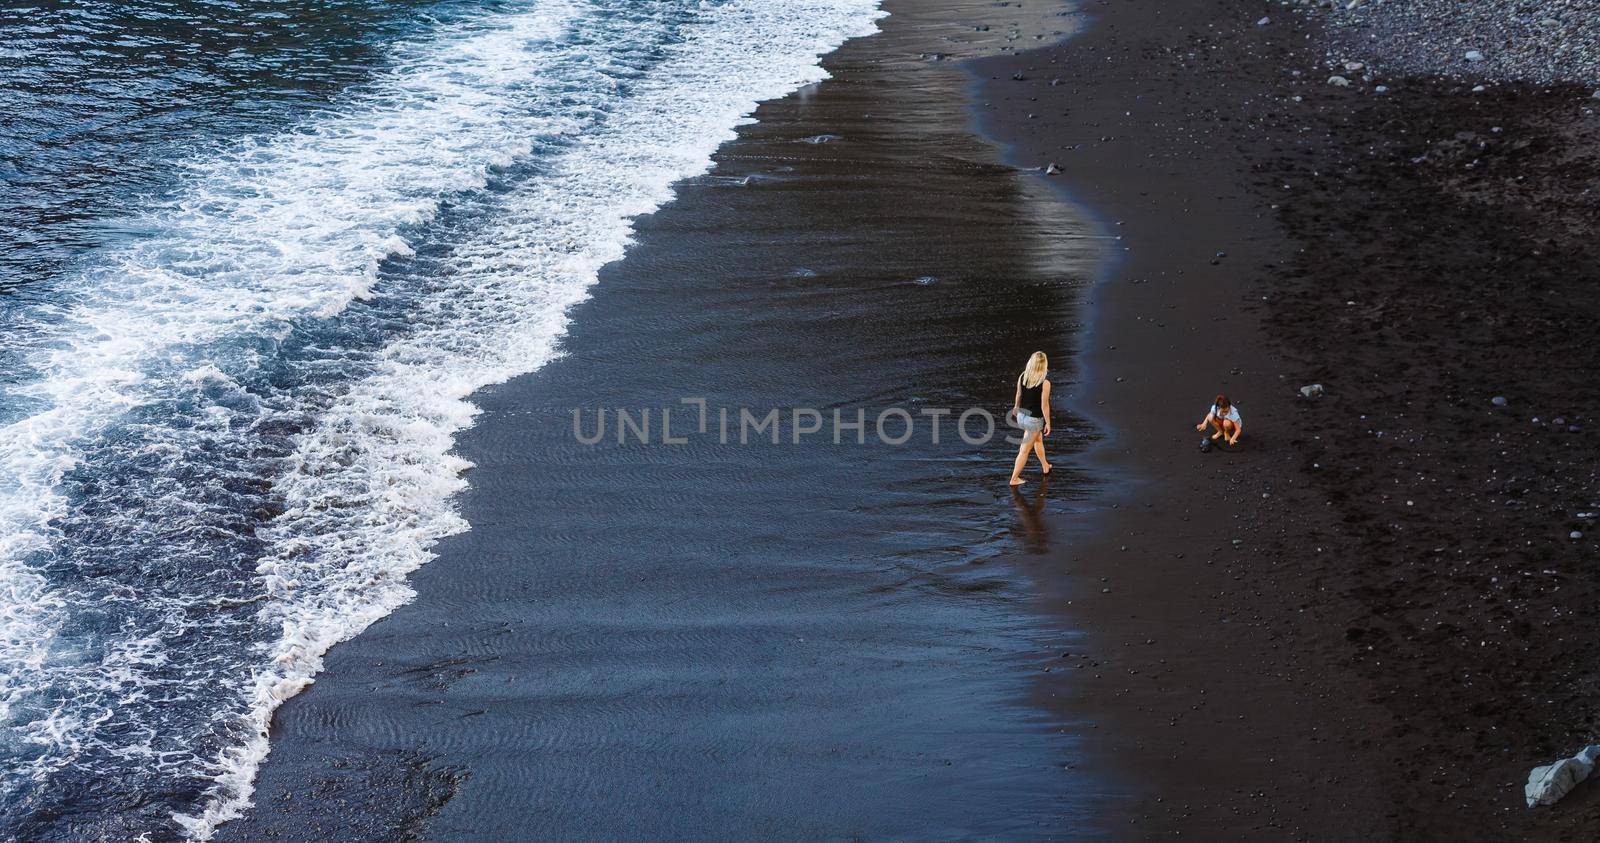 Family holiday on Tenerife, Spain, Europe. Mother and daughter outdoors on ocean. Portrait travel tourists - mom with child. Positive human emotions, active lifestyles. Happy young family on sea beach